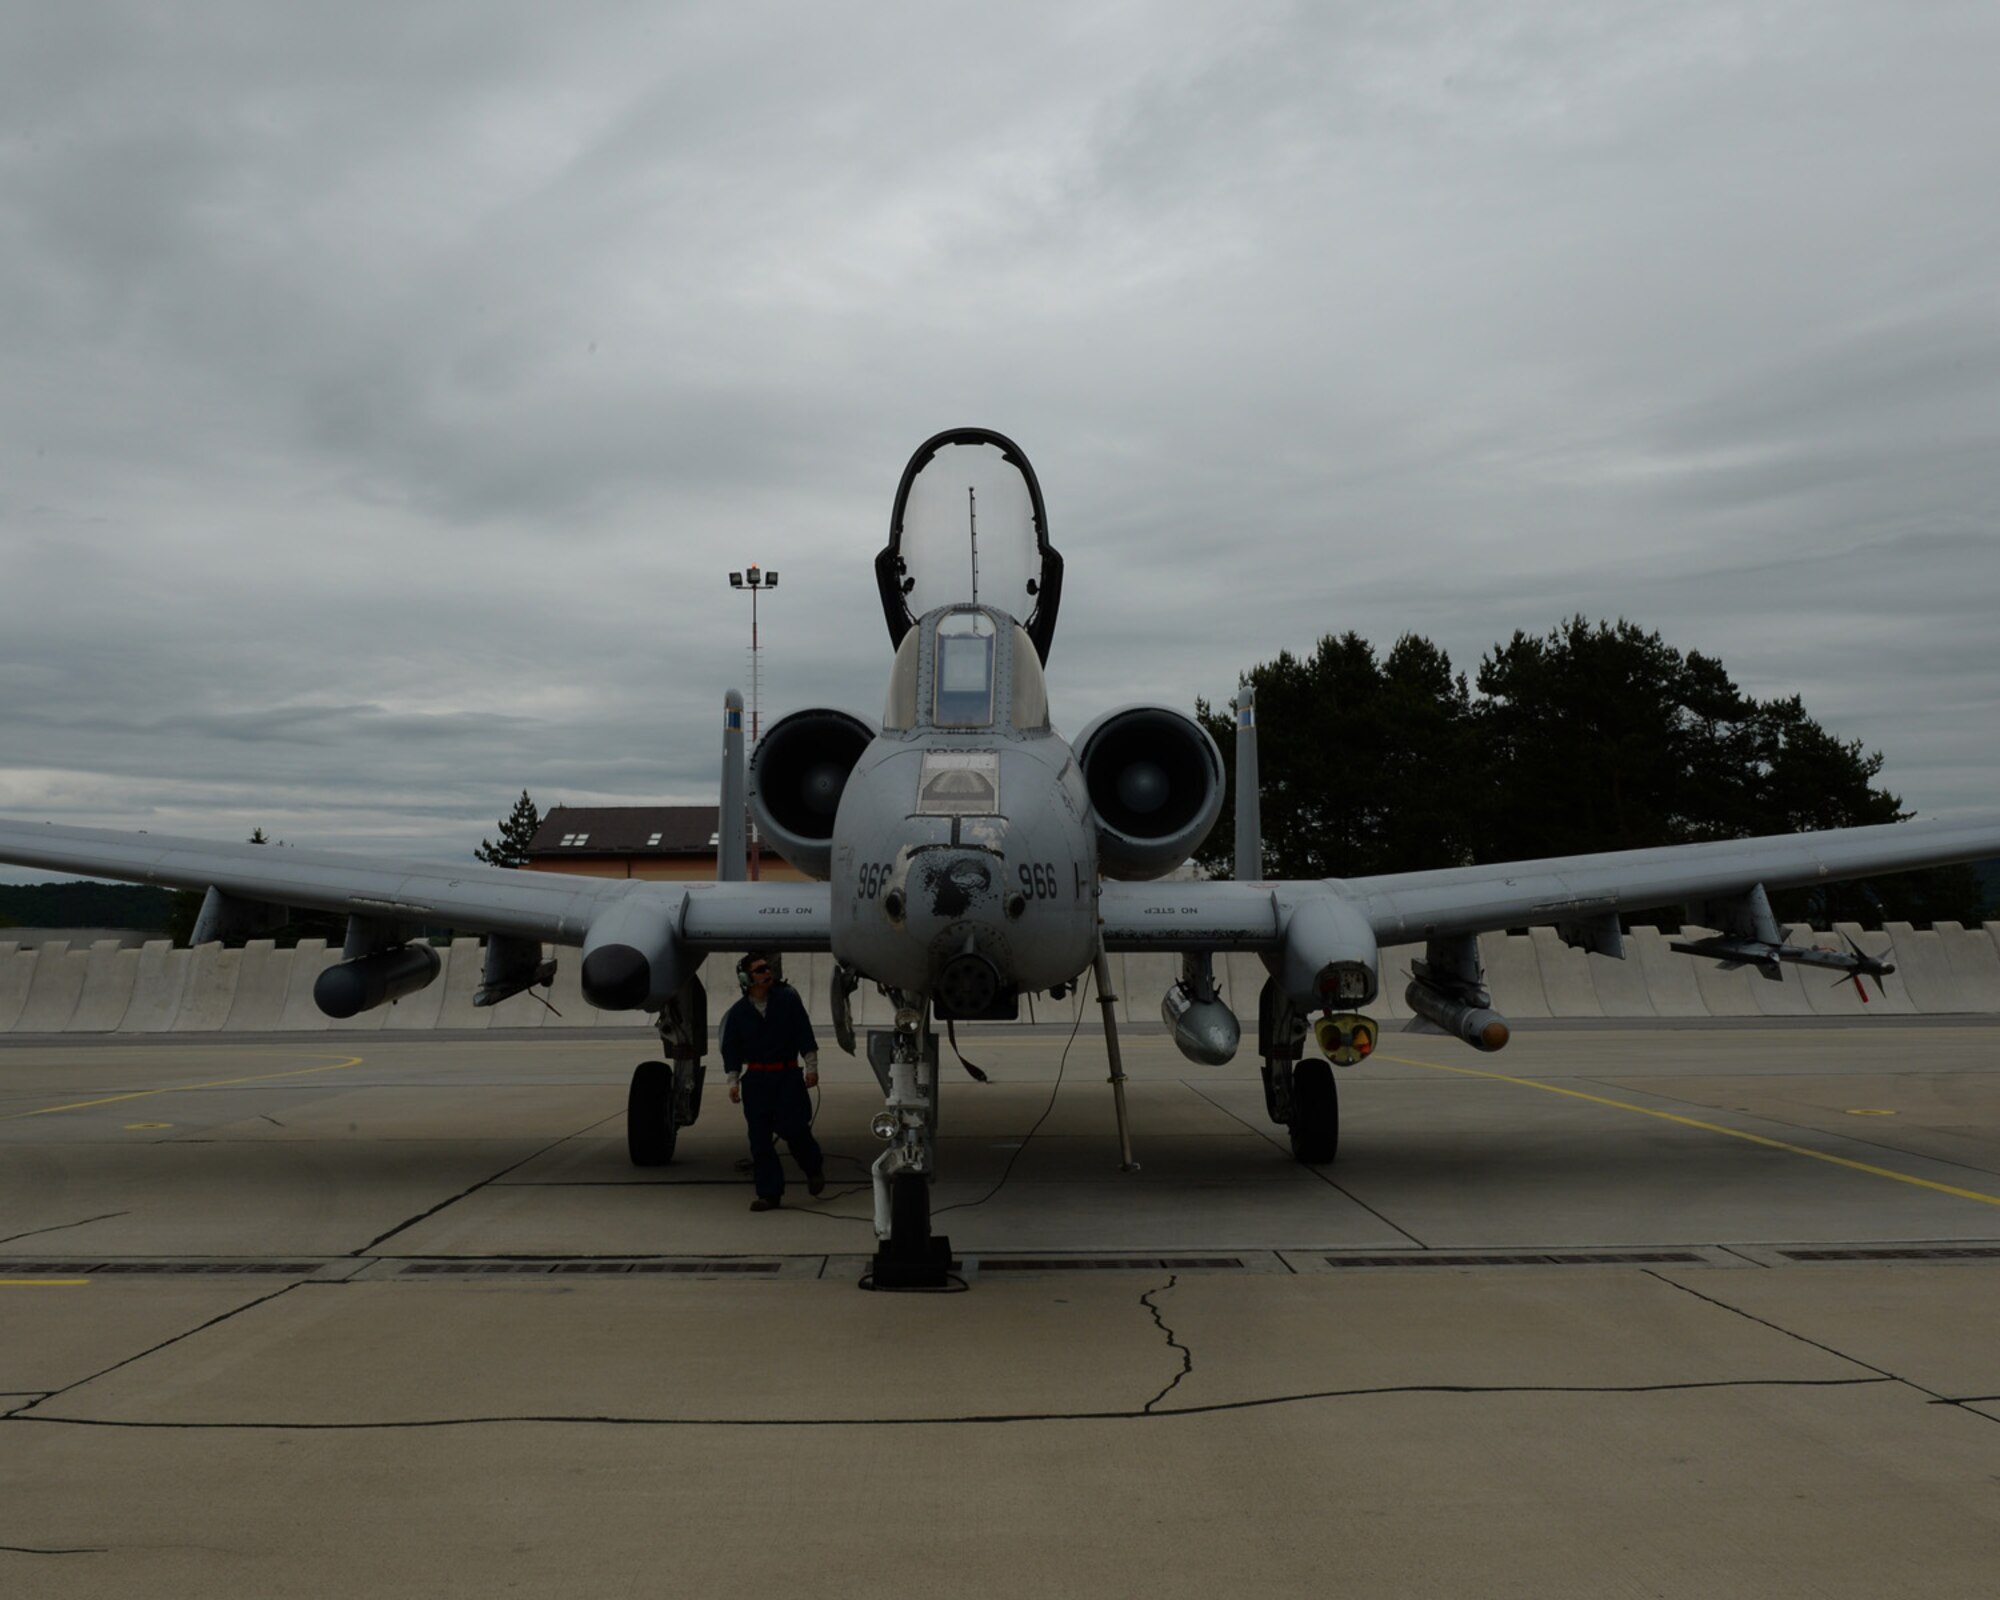 A U.S. Air Force crew chief from the 354th Expeditionary Fighter Squadron performs pre-flight checks on a U.S. Air Force A-10 Thunderbolt II attack aircraft during a theater security package deployment at Sliac Air Base, Slovakia, May 22, 2015. The U.S. Air Force’s forward presence in Europe allows cooperation among NATO allies and partners to develop and improve ready air forces capable of maintaining regional security. (U.S. Air Force photo by Senior Airman Dylan Nuckolls/Released)